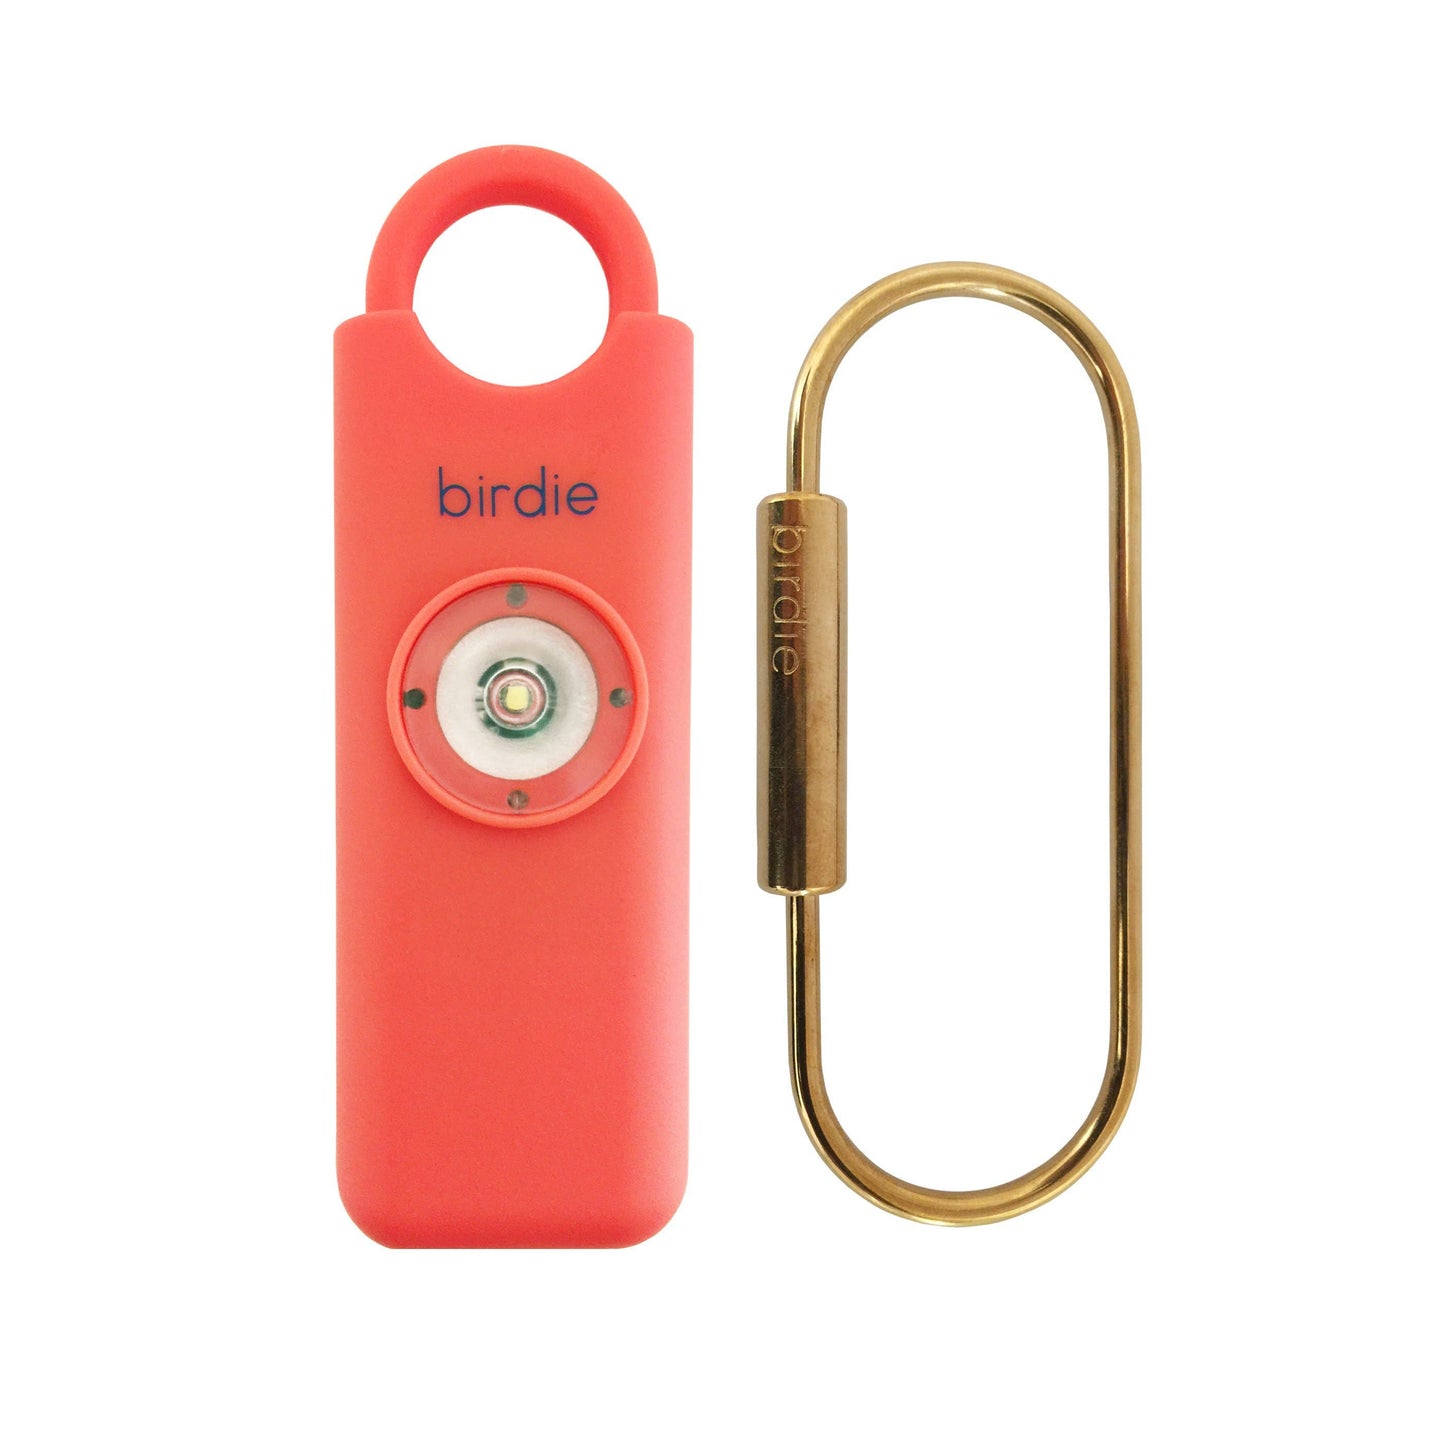 She's Birdie Personal Safety Alarm Coral